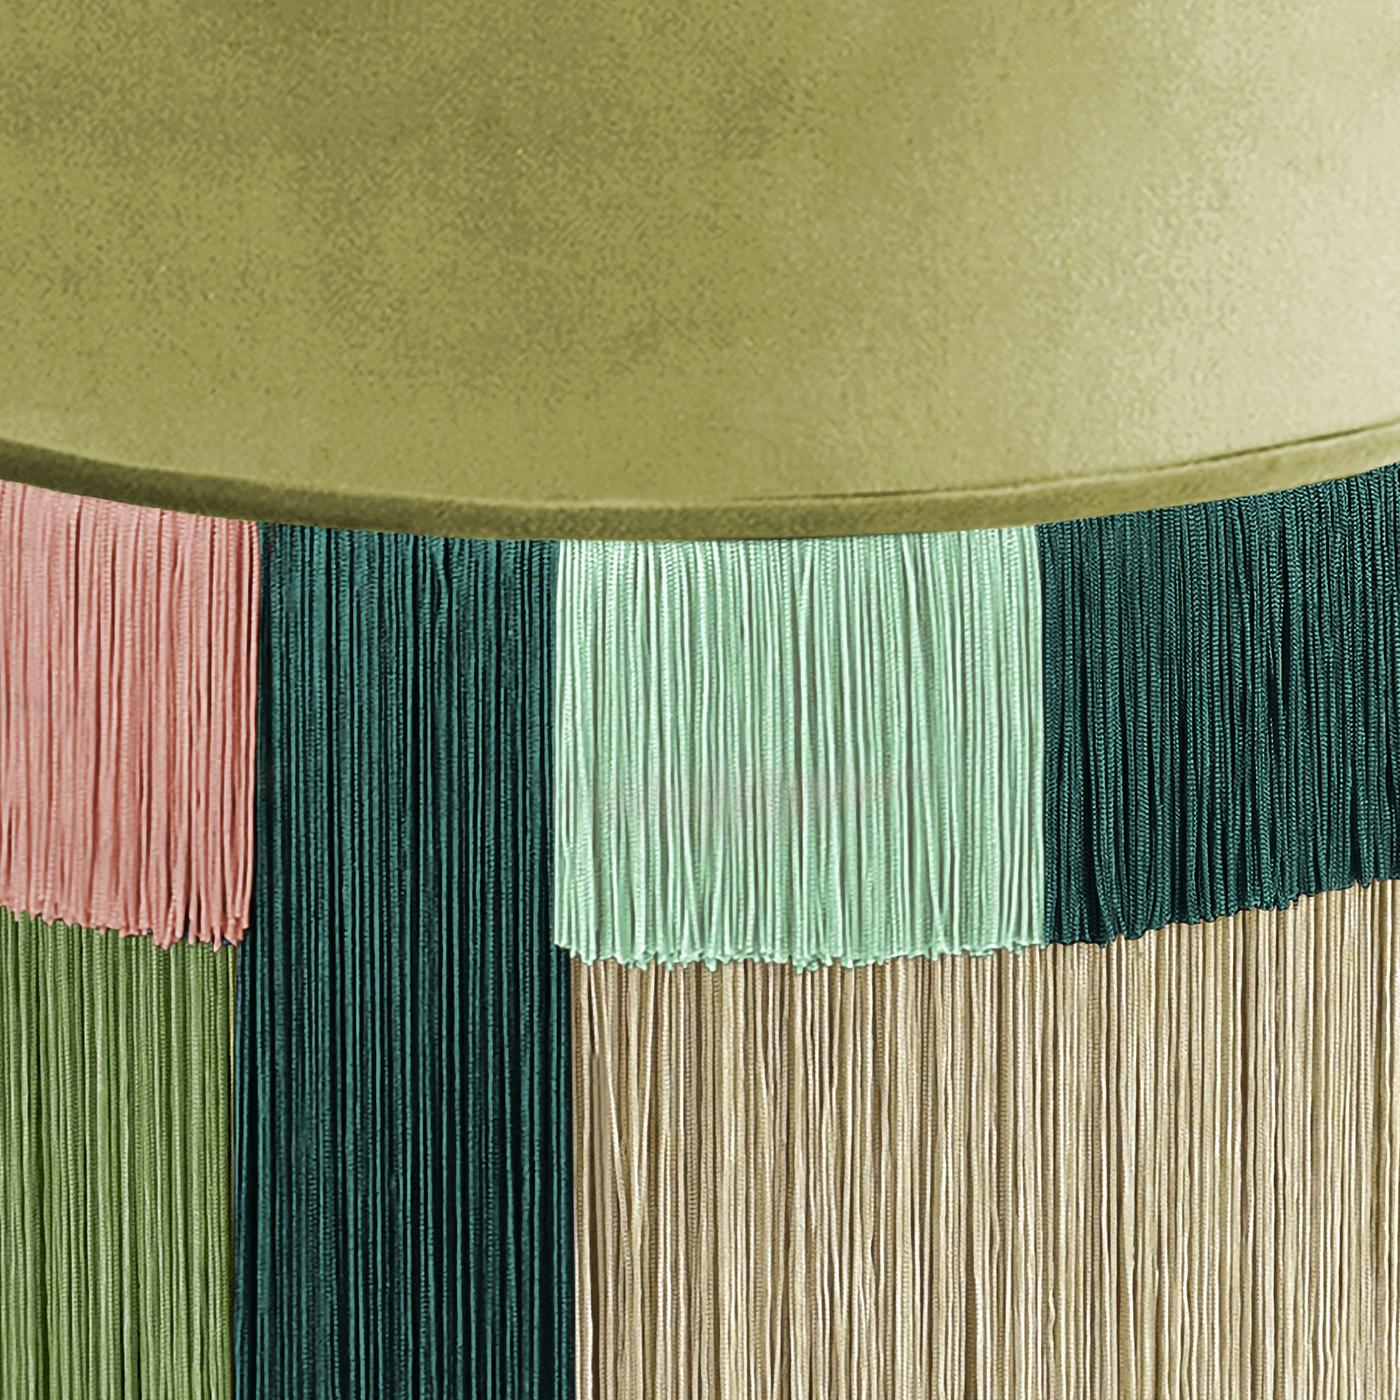 Mostly monochromatic, but with a touch of pink, this charming round pouf features viscose fringe cut to different lengths to create a unique geometric effect. In olive, emerald and sea foam green, the pouf is accented with a small square of pink,